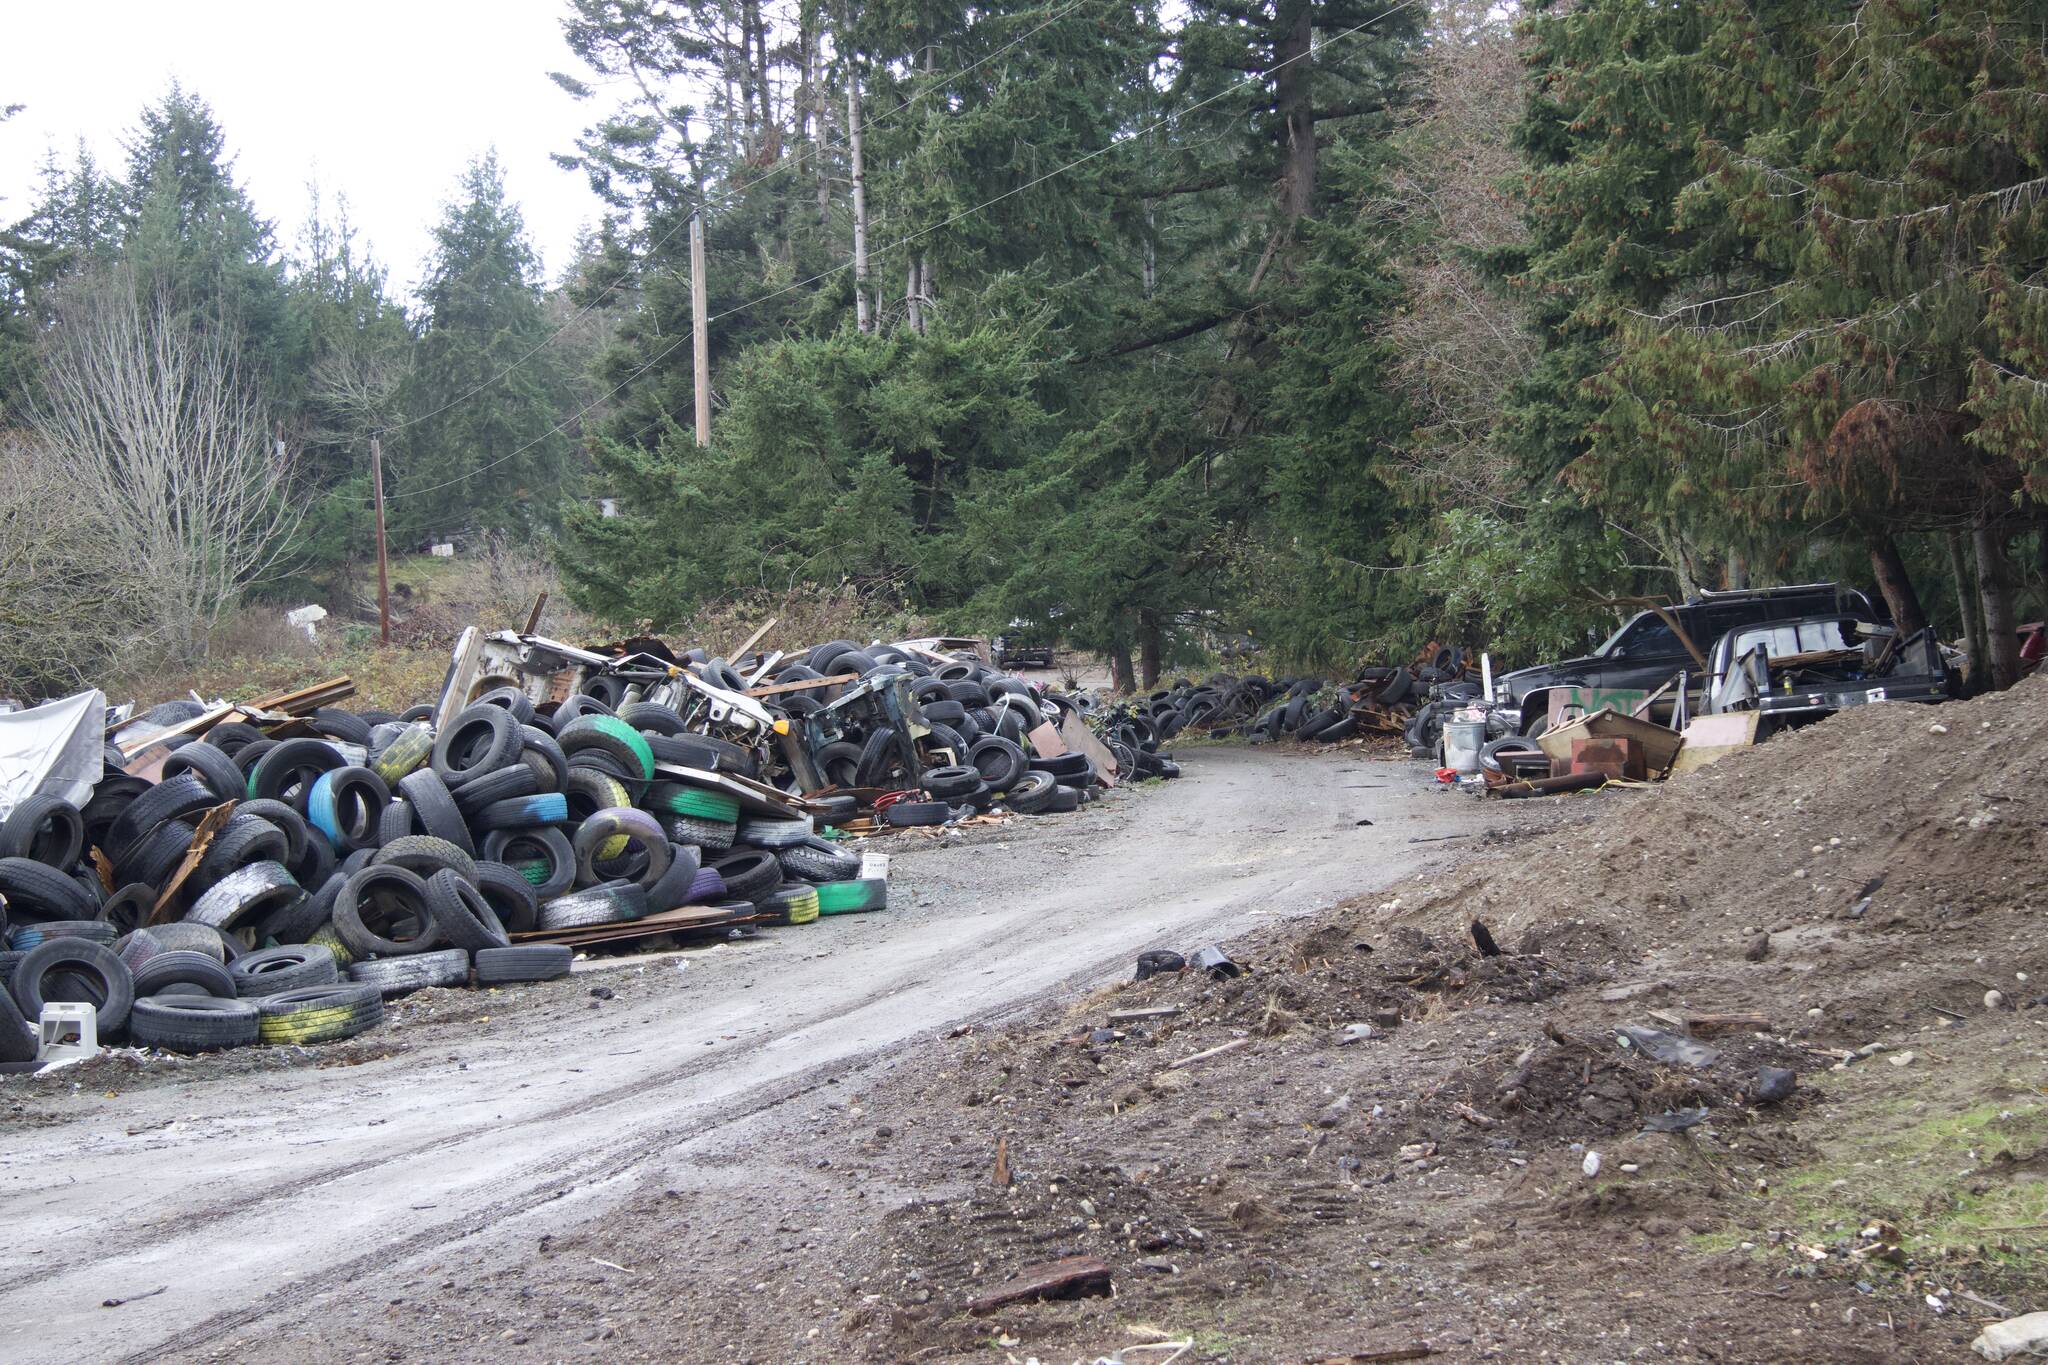 Photo by Rachel Rosen/Whidbey News-Times
Tires, bicycles and vehicles are among the garbage that has been dumped on the North Whidbey property.